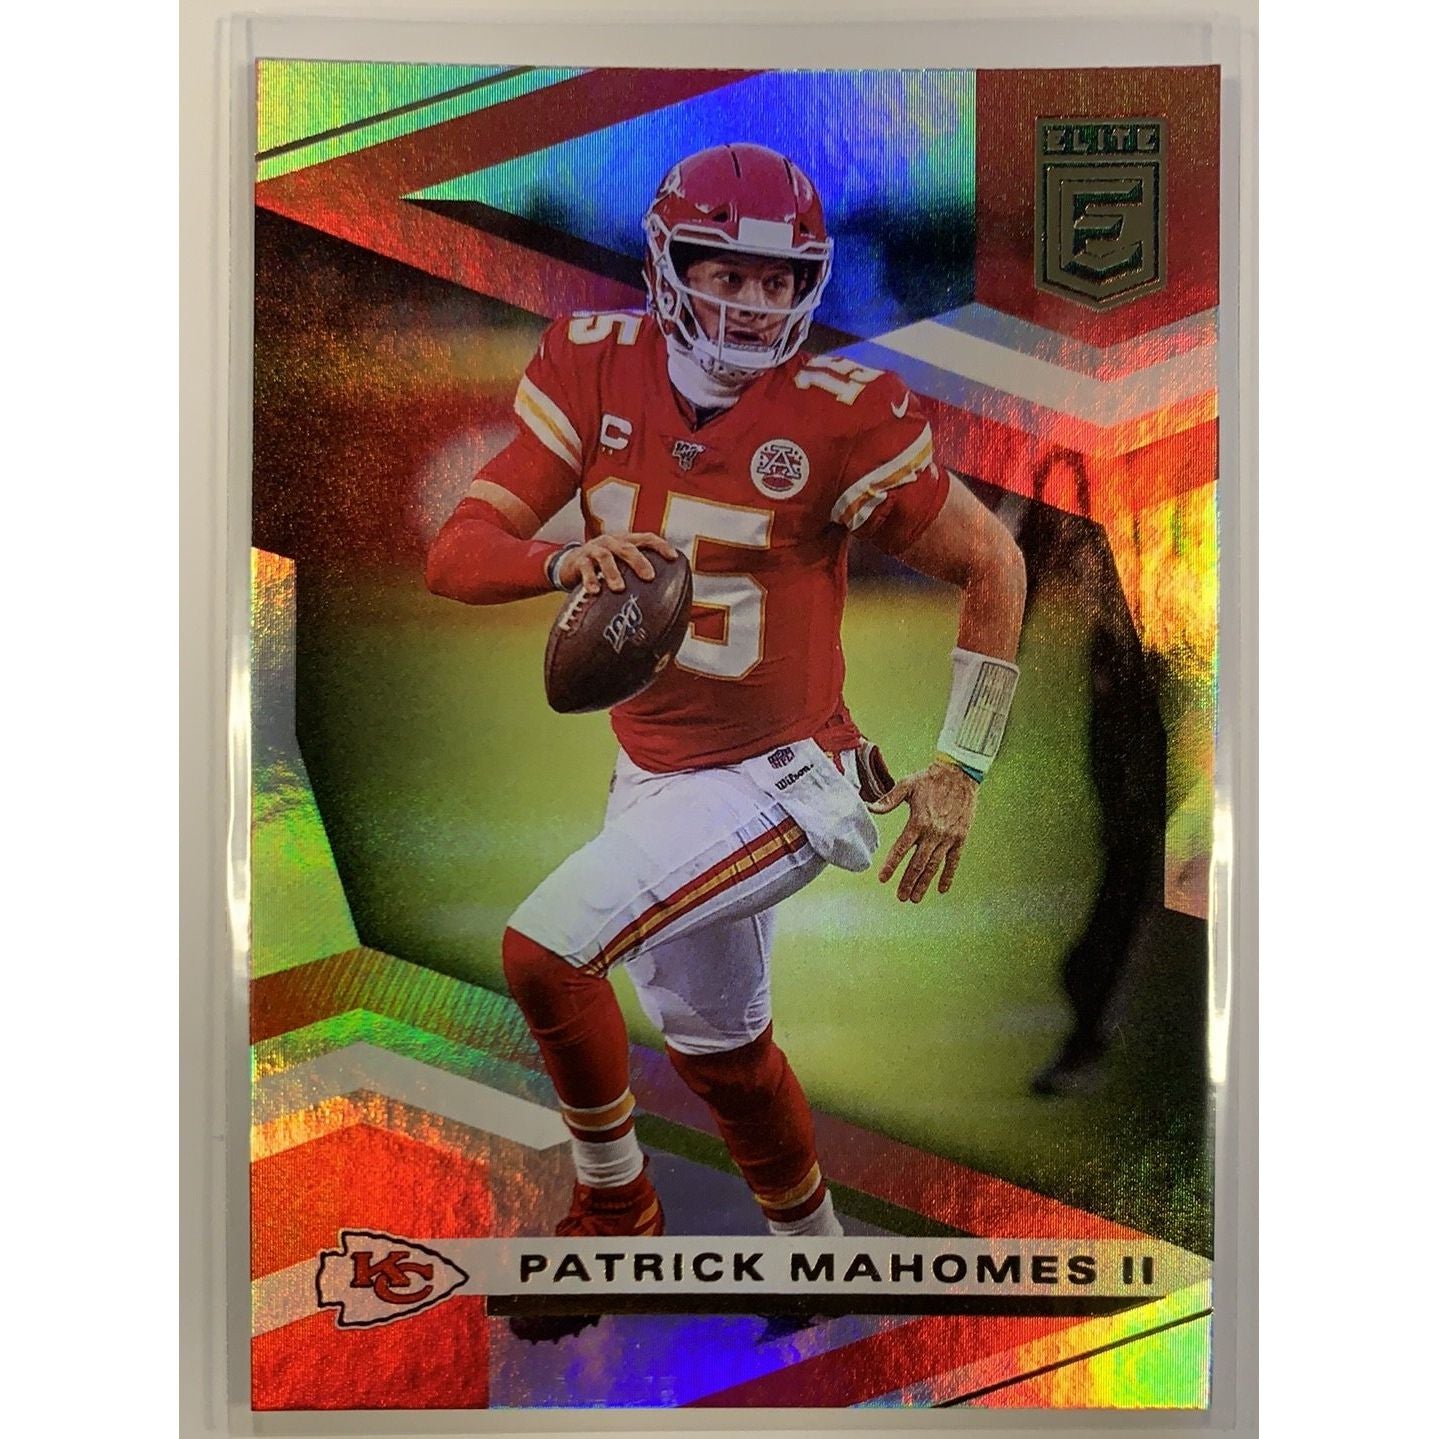  2020 Donruss Elite Patrick Mahomes II Base #1  Local Legends Cards & Collectibles